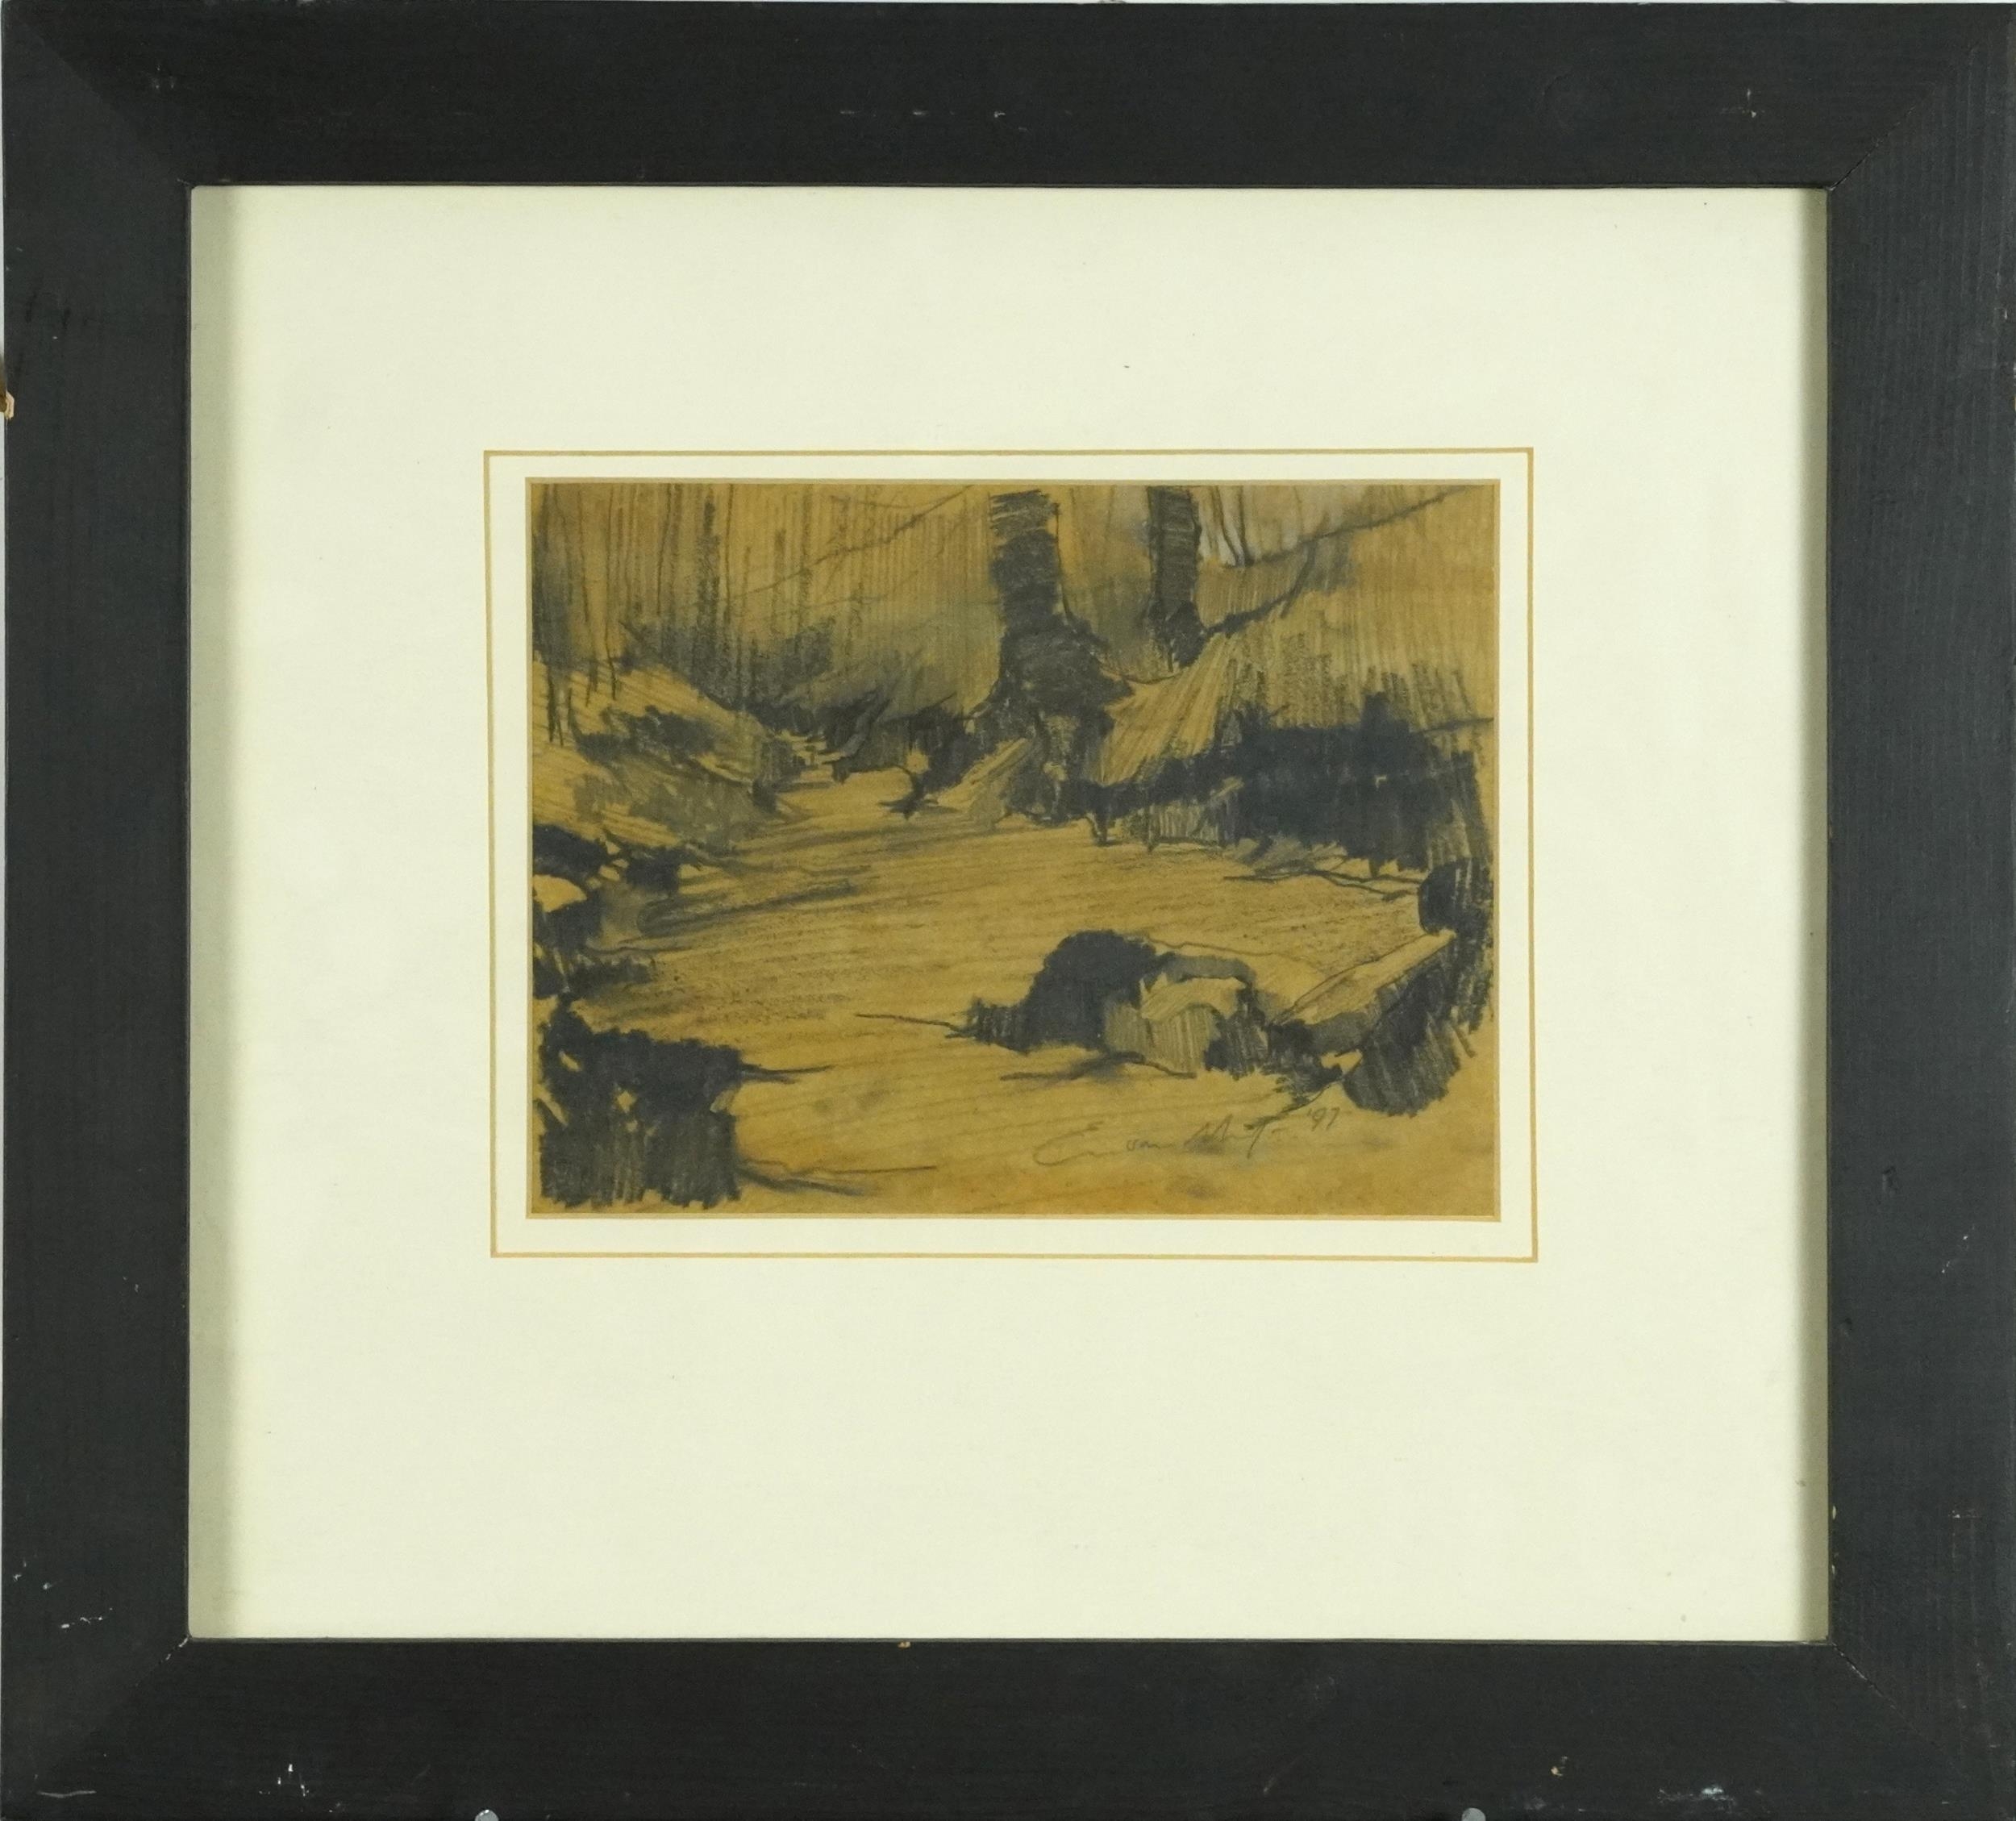 Emerson Hayes 1997 - River Edge, charcoal, chalk and graphite, inscribed Arcturus Fine Art Limited - Image 2 of 5